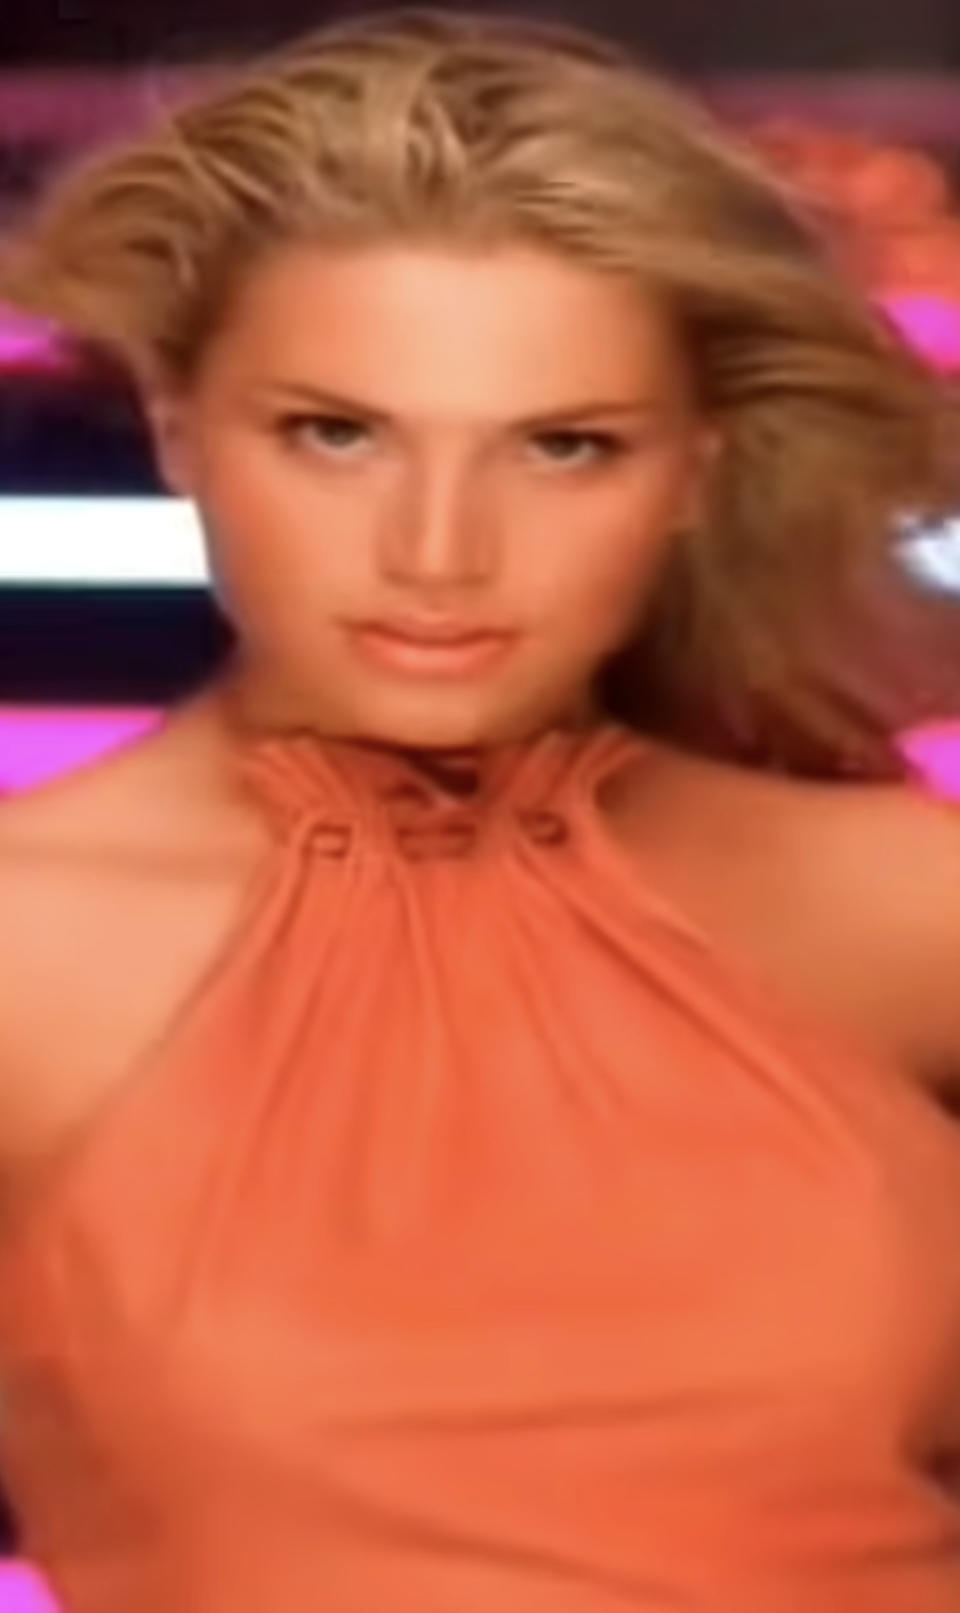 Ford in her "I Wanna Be Bad" music video